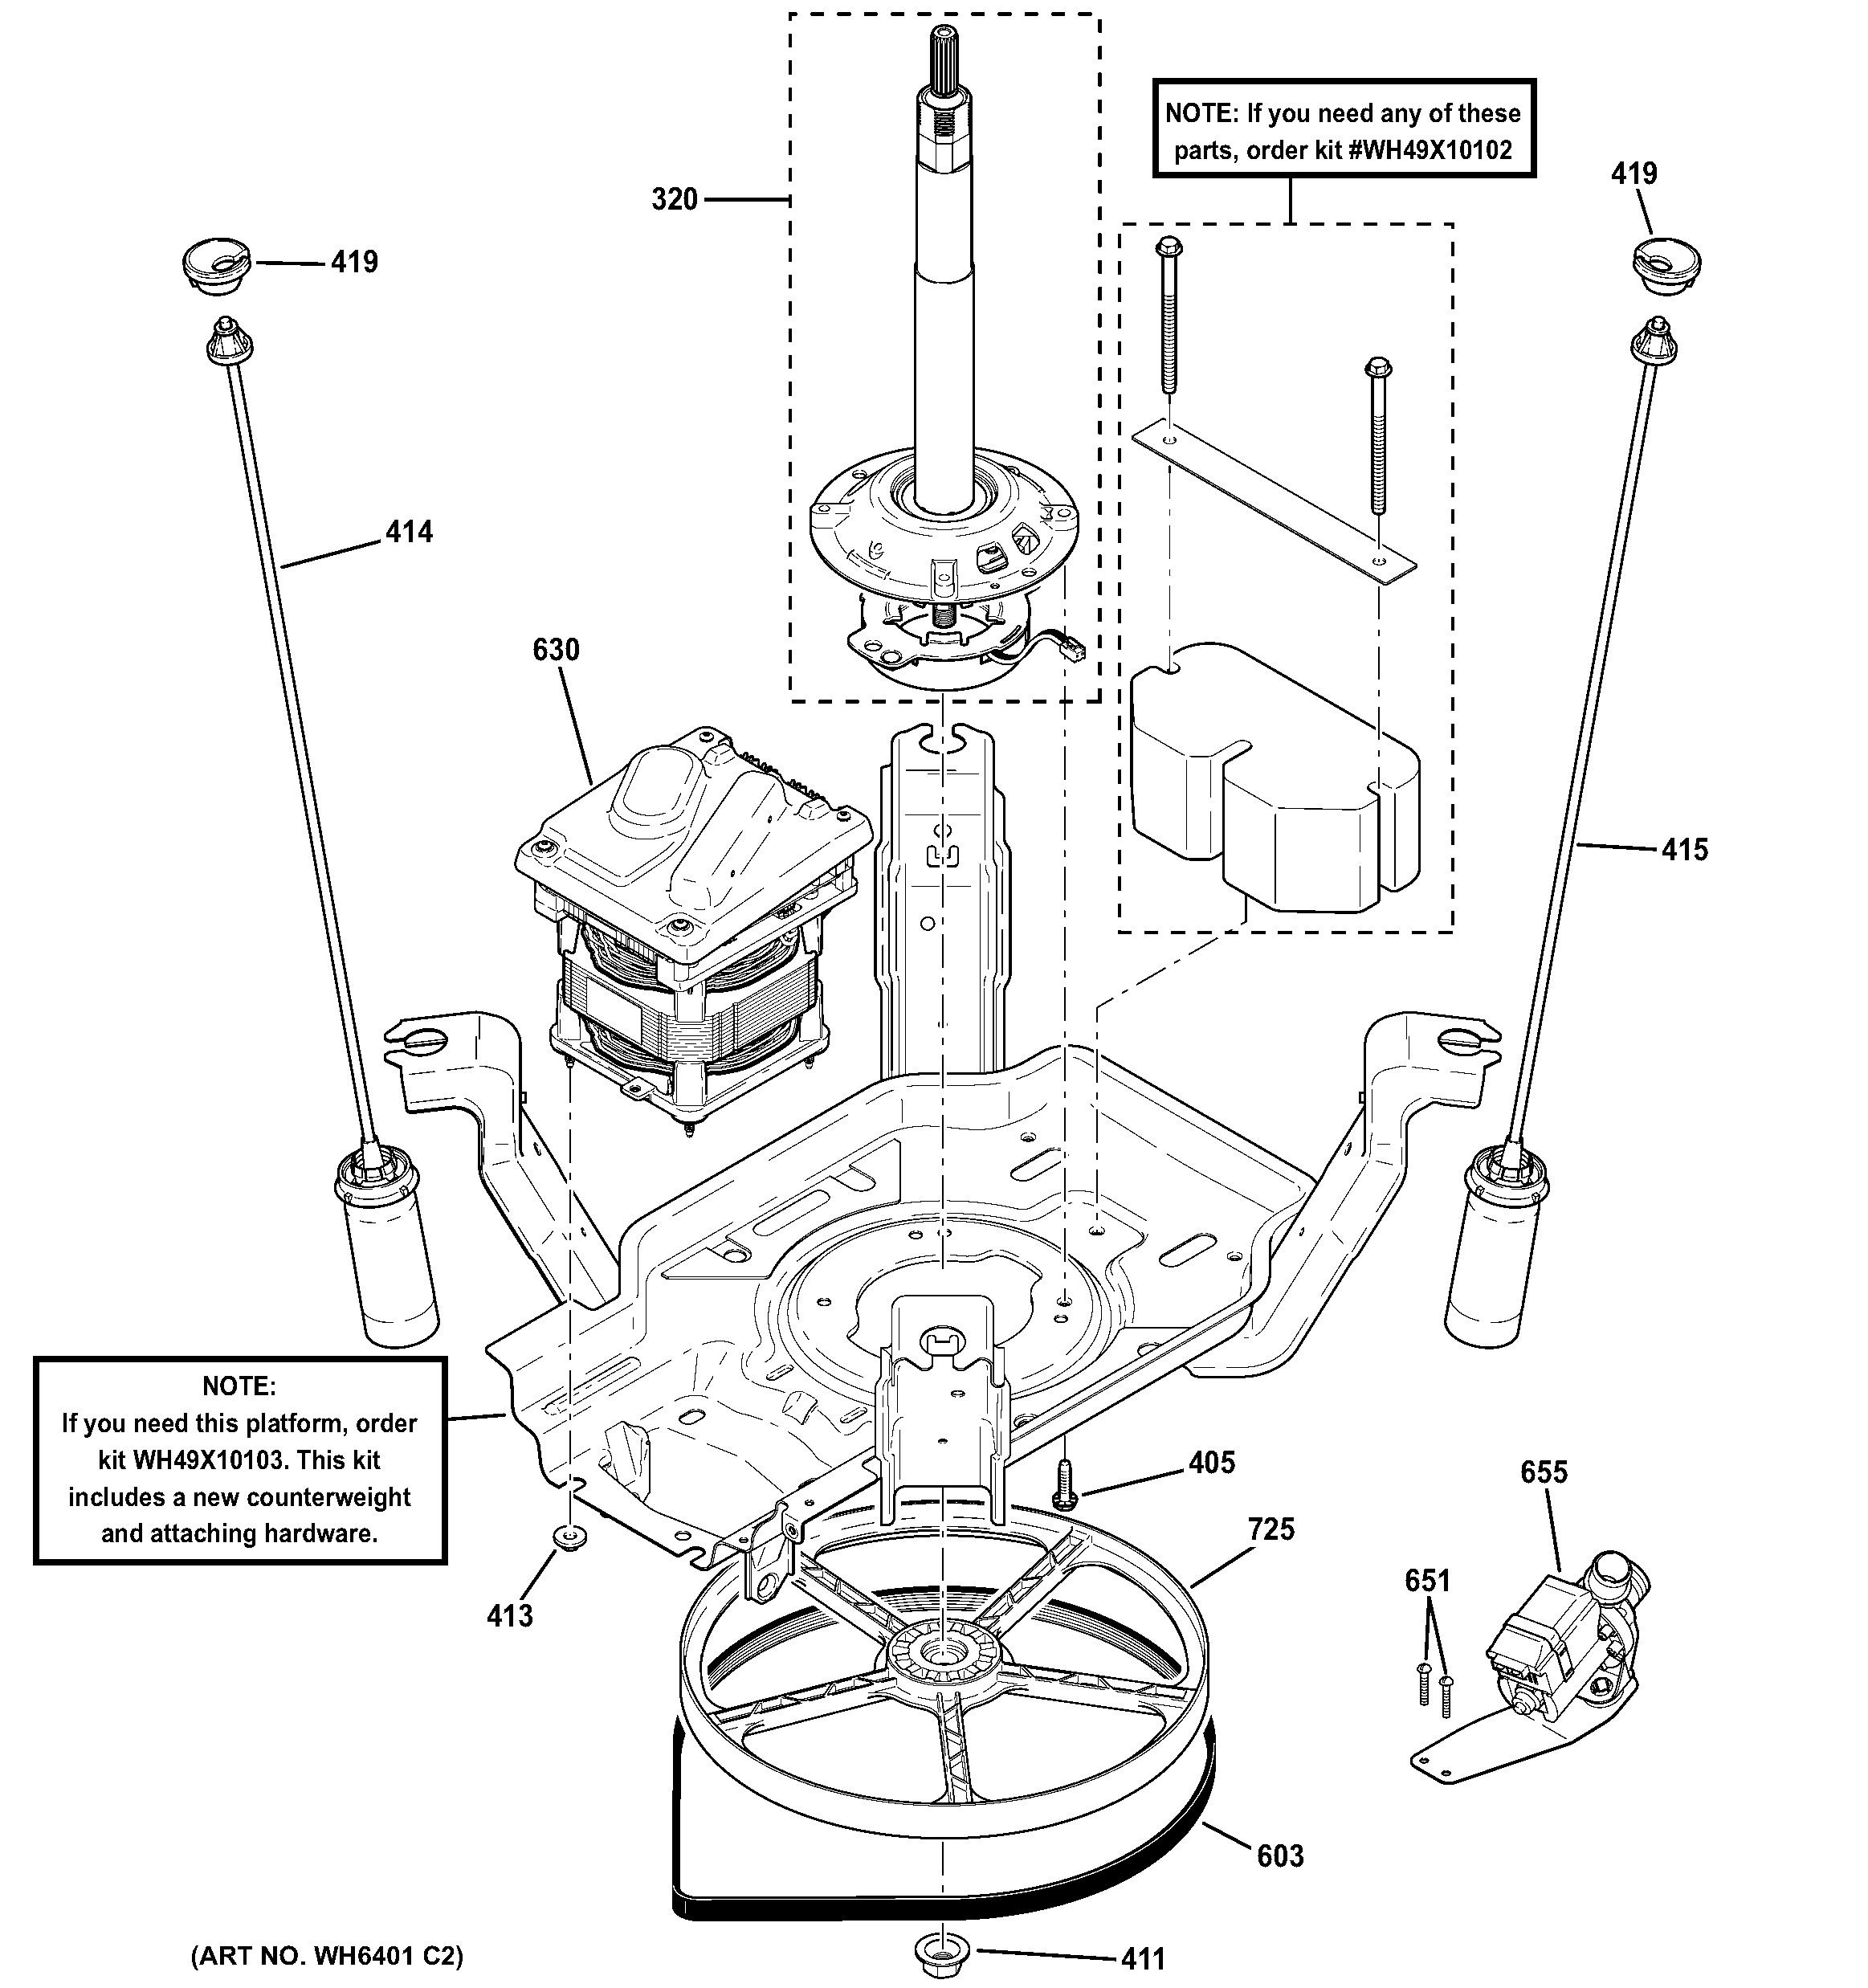 Clutch Components Diagram Ge Washer Parts Model Gcwn4950d0ws Of Clutch Components Diagram